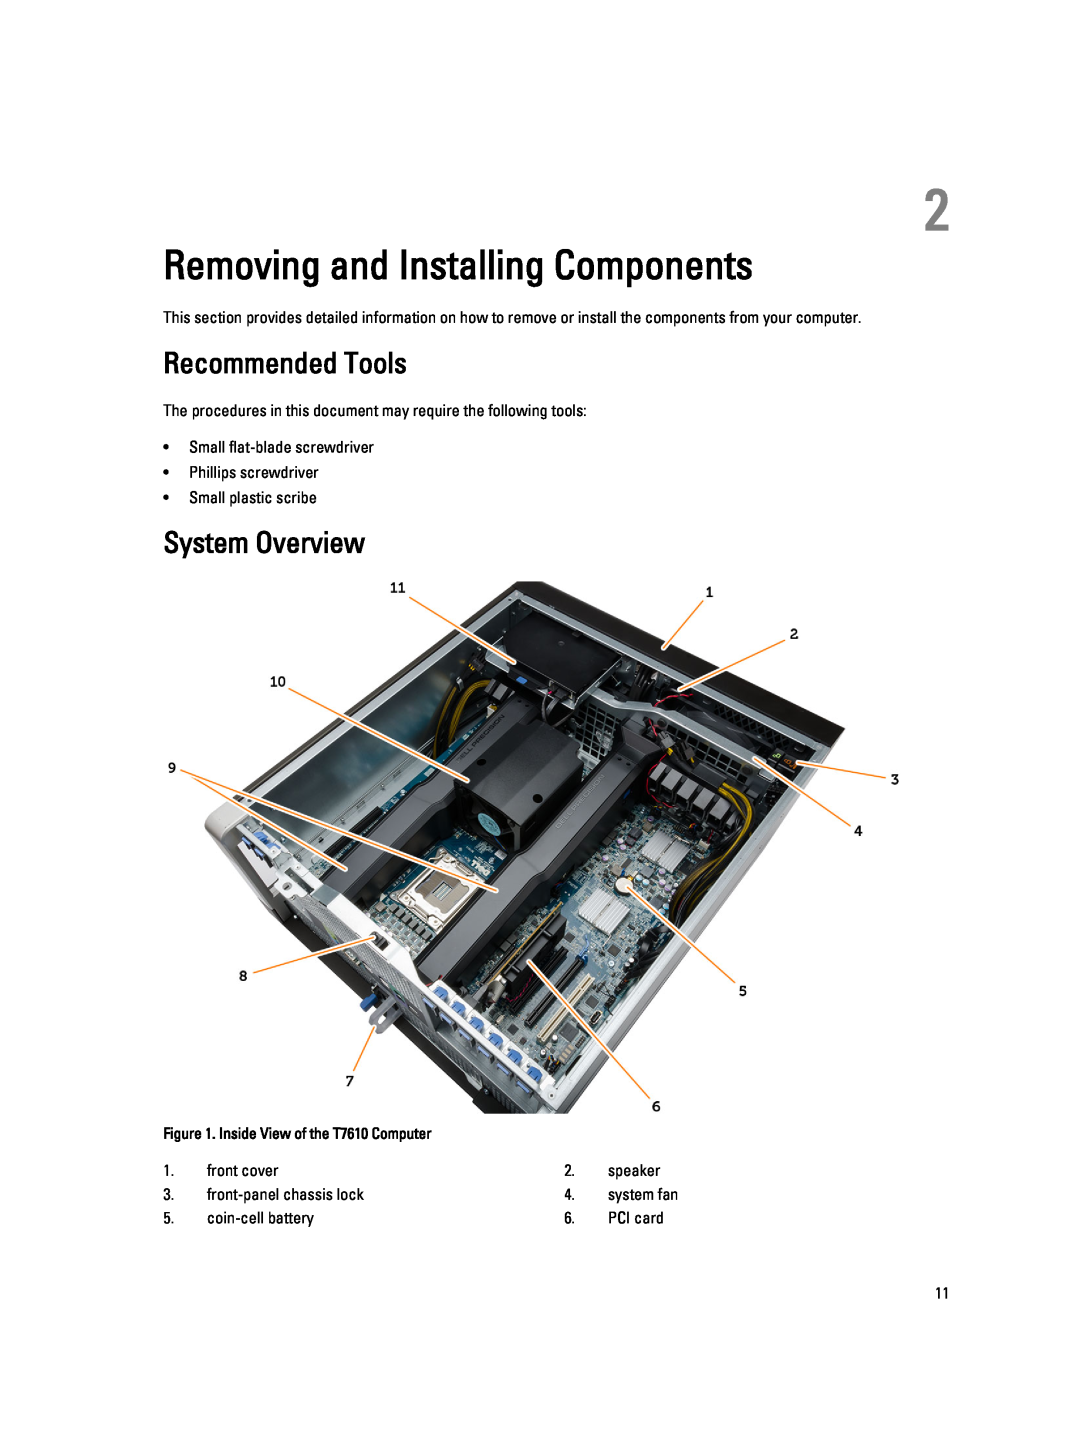 Dell T7610 owner manual Removing and Installing Components, Recommended Tools, System Overview 